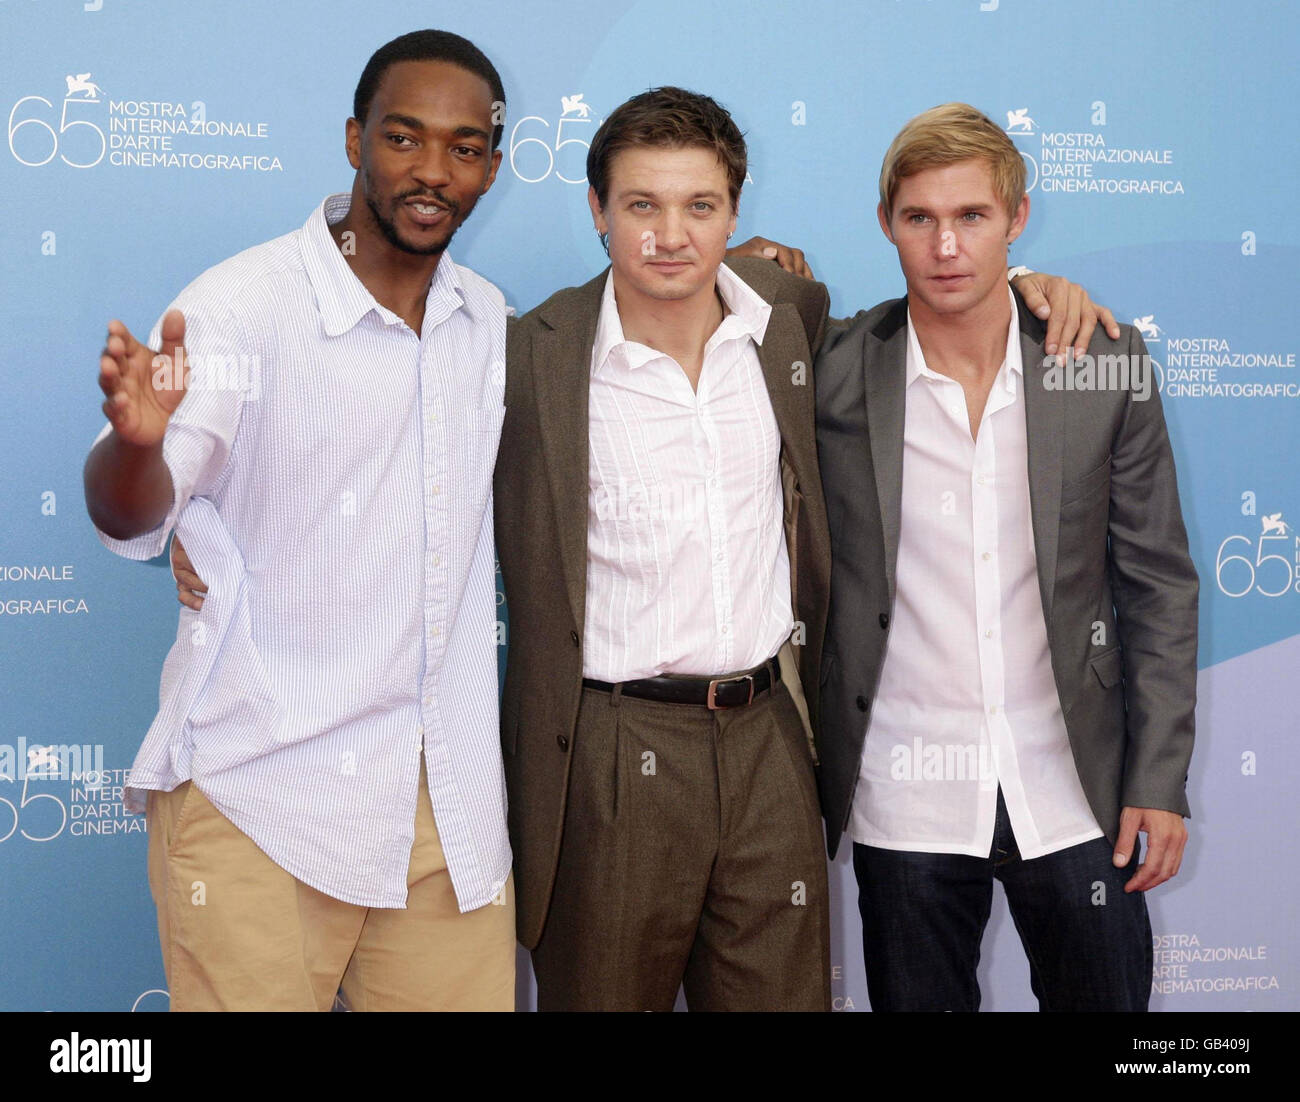 AP OUT. From left to right: Anthony Mackie, Jeremy Renner and Brian Geraghty attend the press conference and photocall of 'The Hurt Locker' at the Casino di Venezia, during the 65th Venice Film Festival, Italy. Stock Photo